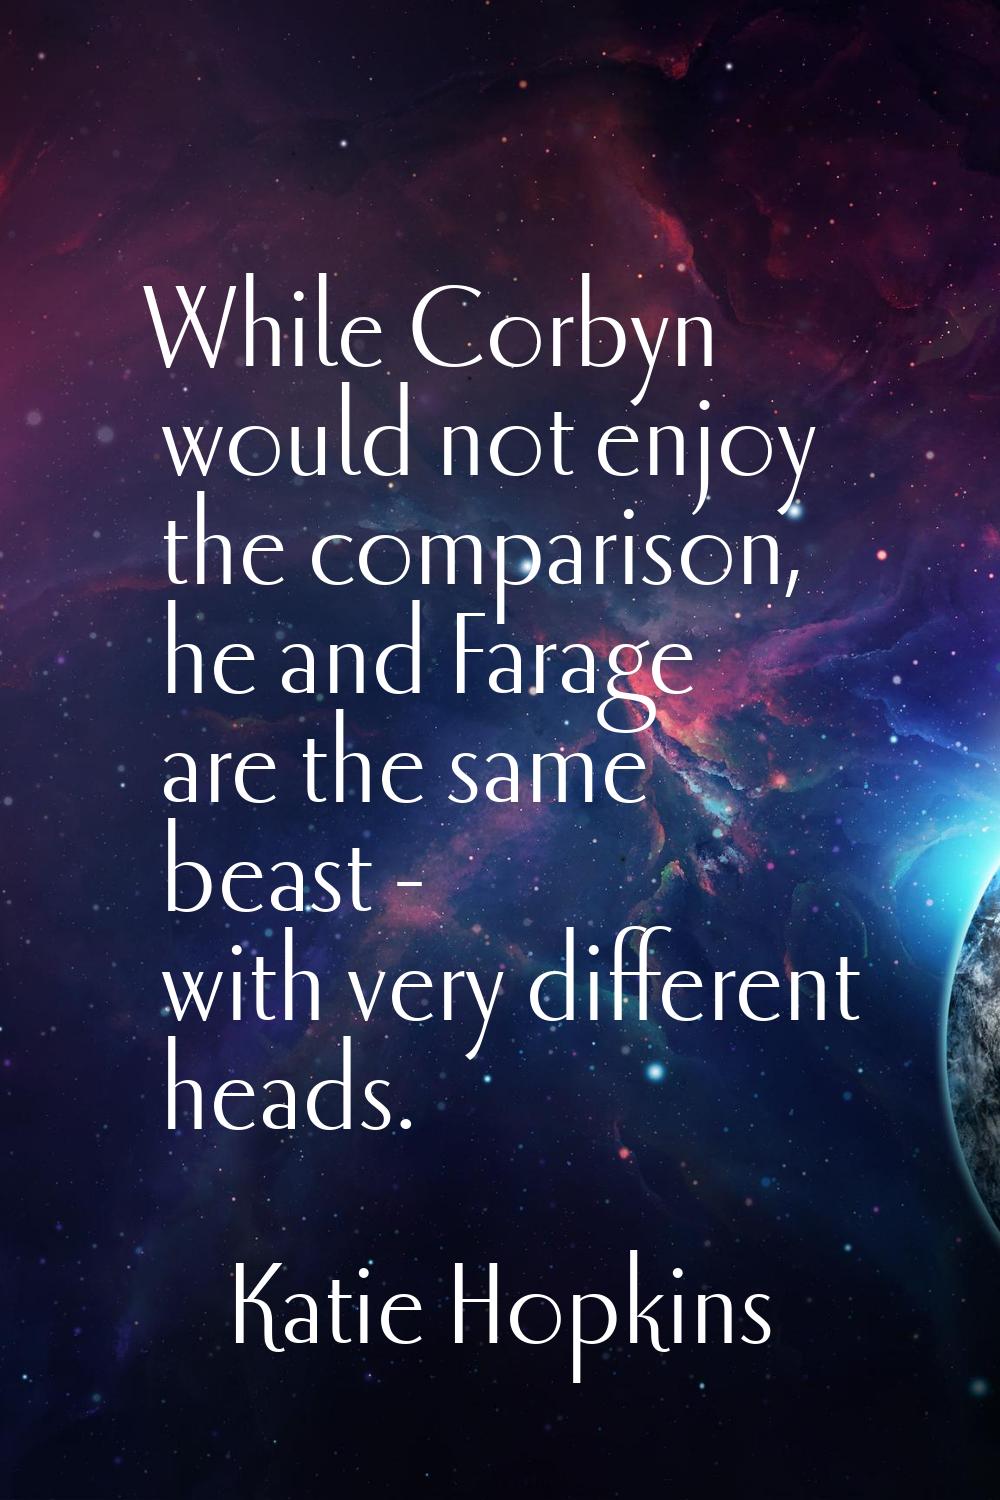 While Corbyn would not enjoy the comparison, he and Farage are the same beast - with very different